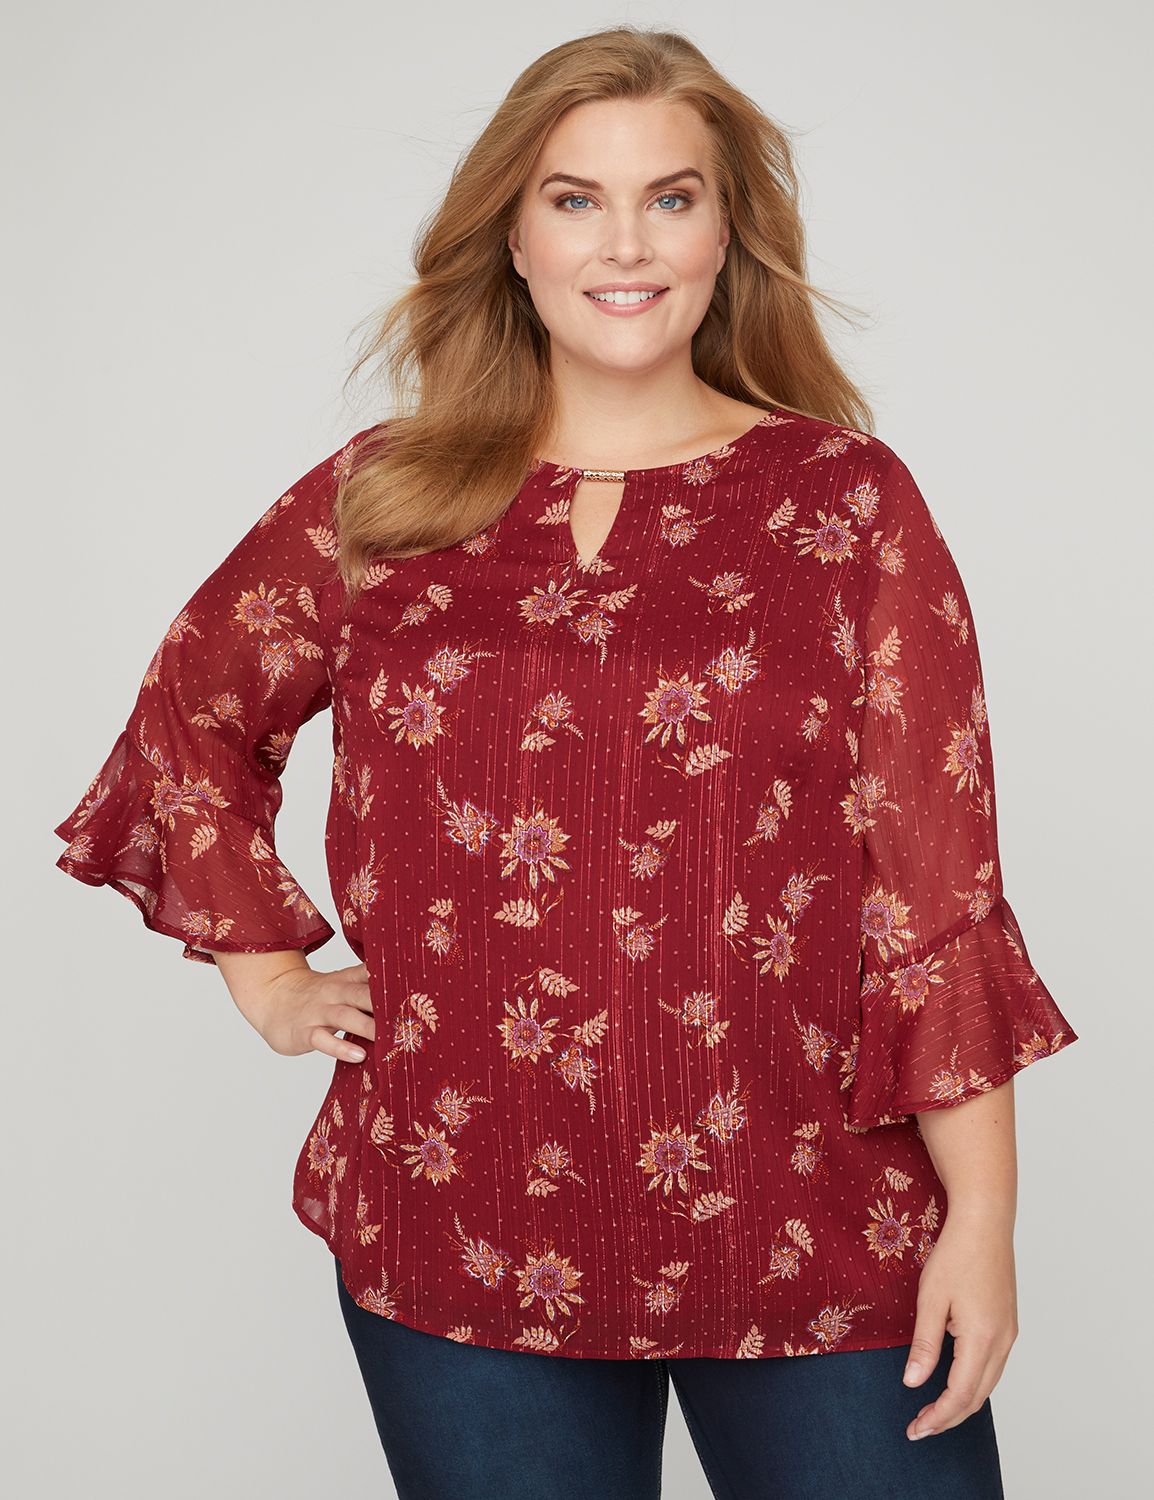 Plus Size Blouses & Shirts | Catherines